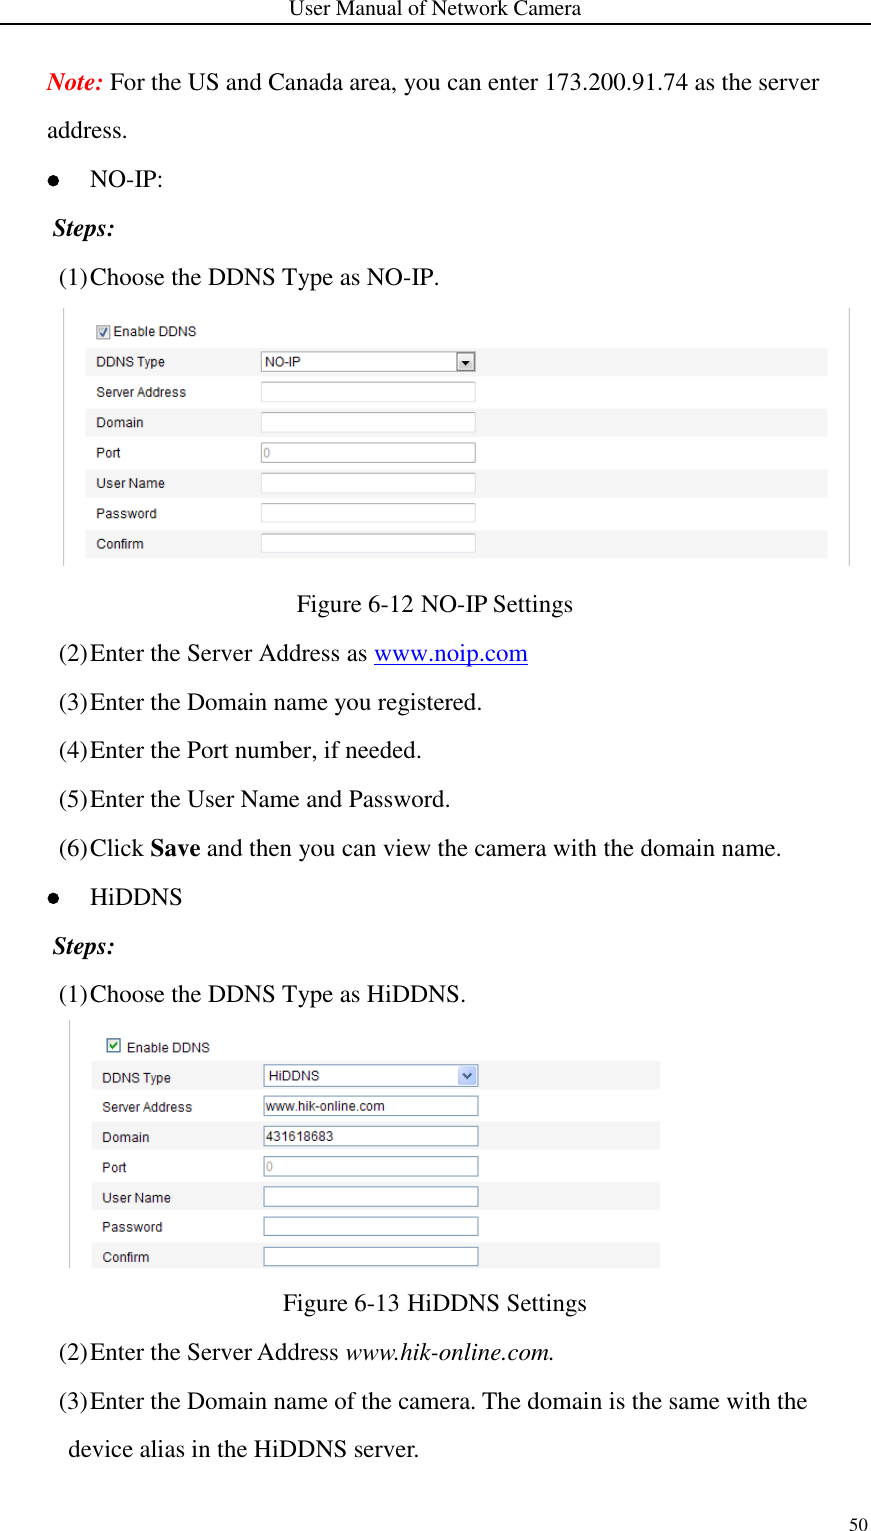 User Manual of Network Camera 50  Note: For the US and Canada area, you can enter 173.200.91.74 as the server address.    NO-IP: Steps: (1) Choose the DDNS Type as NO-IP.  Figure 6-12 NO-IP Settings (2) Enter the Server Address as www.noip.com (3) Enter the Domain name you registered. (4) Enter the Port number, if needed. (5) Enter the User Name and Password. (6) Click Save and then you can view the camera with the domain name.  HiDDNS Steps: (1) Choose the DDNS Type as HiDDNS.  Figure 6-13 HiDDNS Settings (2) Enter the Server Address www.hik-online.com.   (3) Enter the Domain name of the camera. The domain is the same with the device alias in the HiDDNS server. 